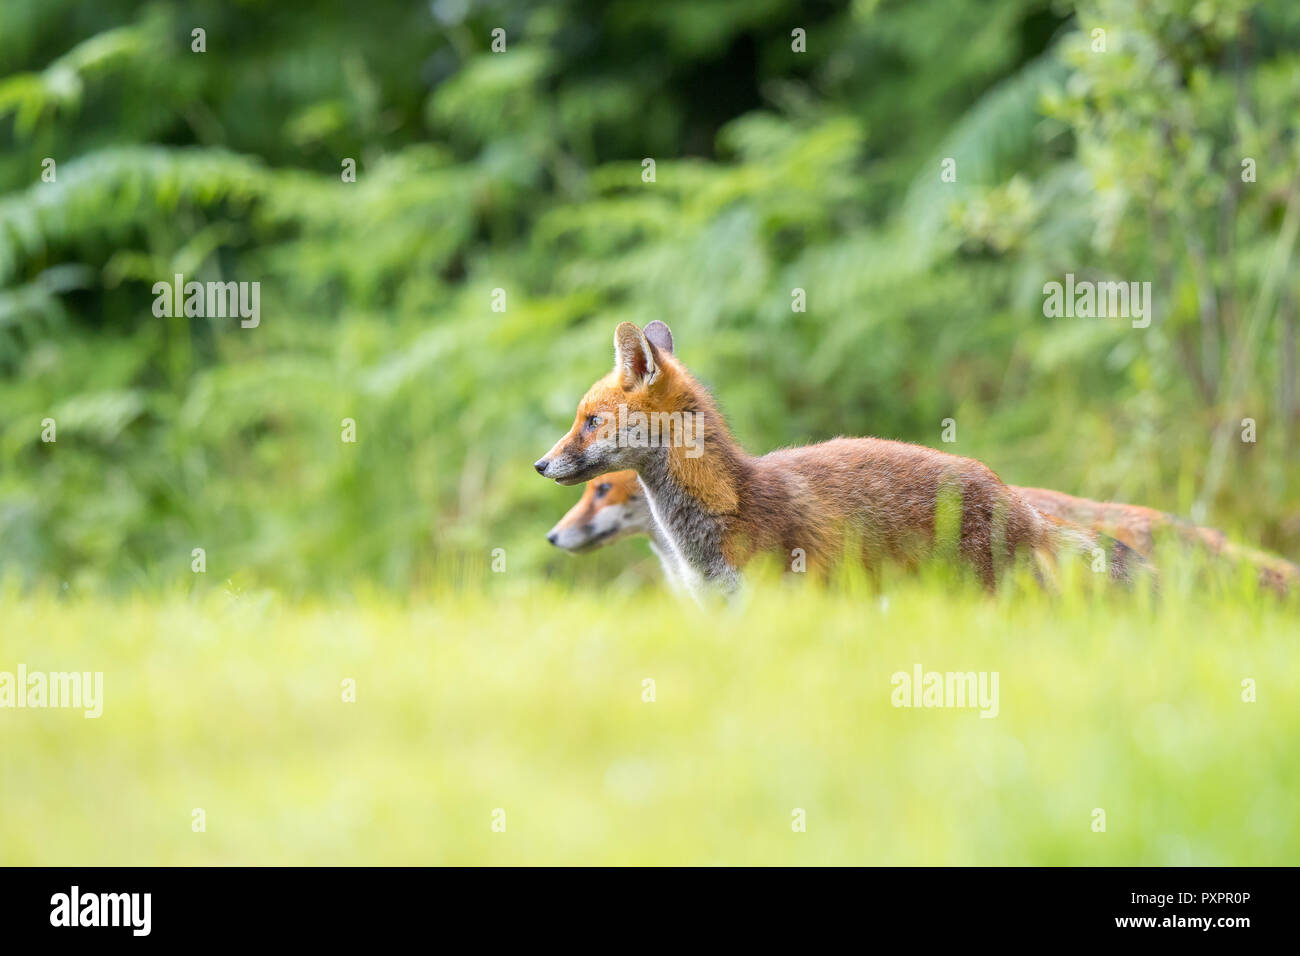 Low angle, side view of pair of young, wild red foxes (Vulpes vulpes) stood still, side by side, alert in grass, with natural UK woodland background. Stock Photo